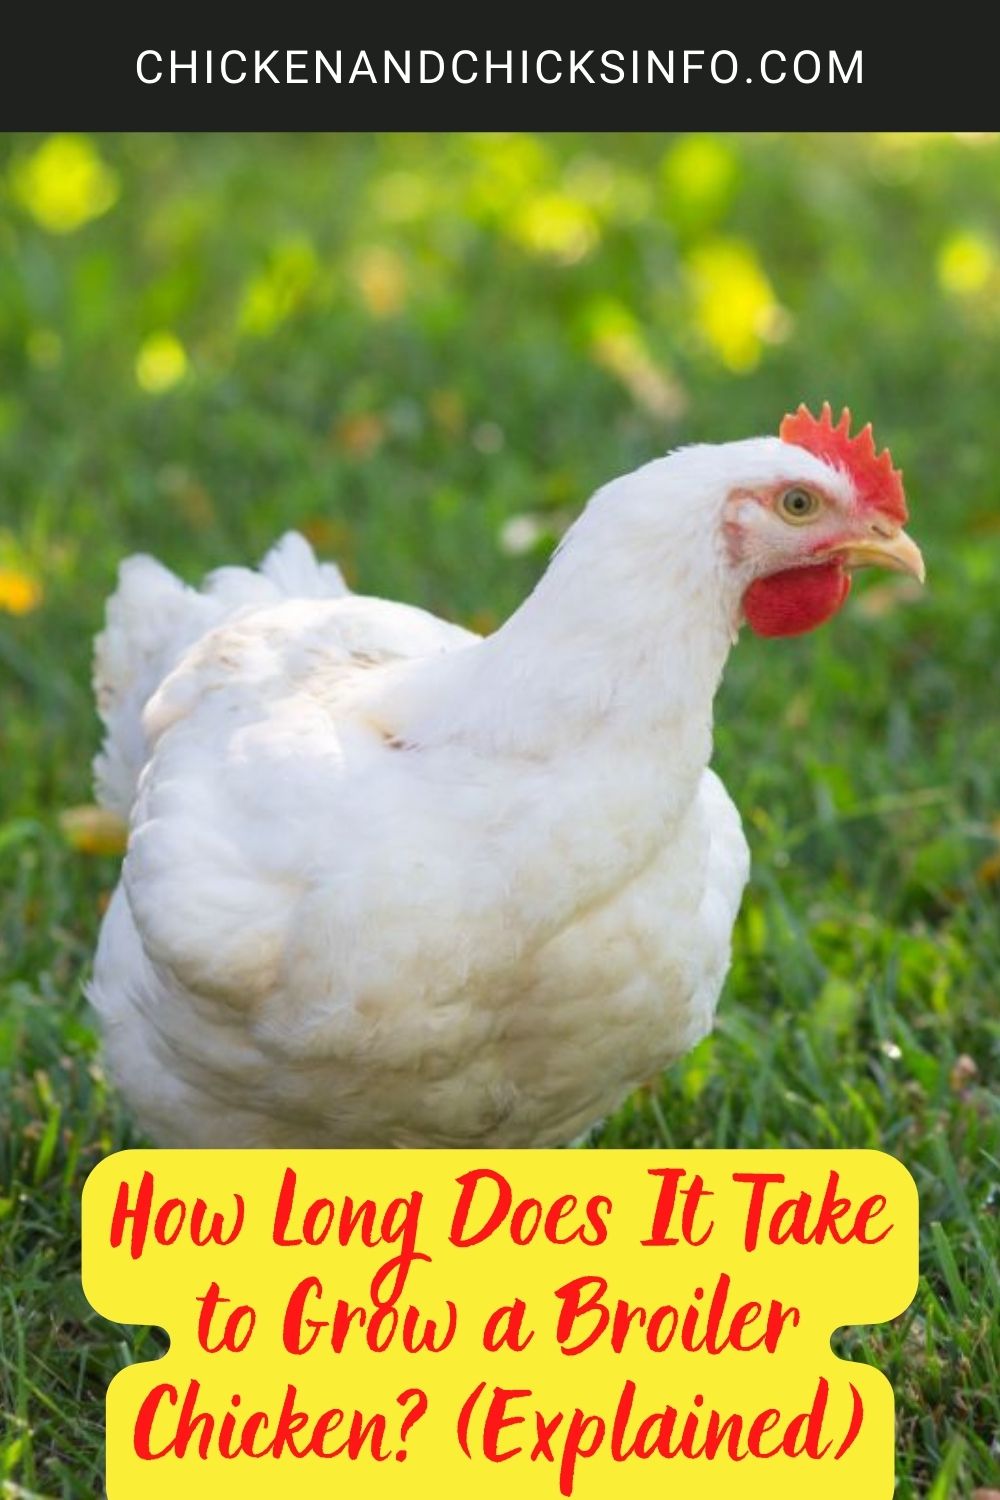 How Long Does It Take to Grow a Broiler Chicken? (Explained) poster.